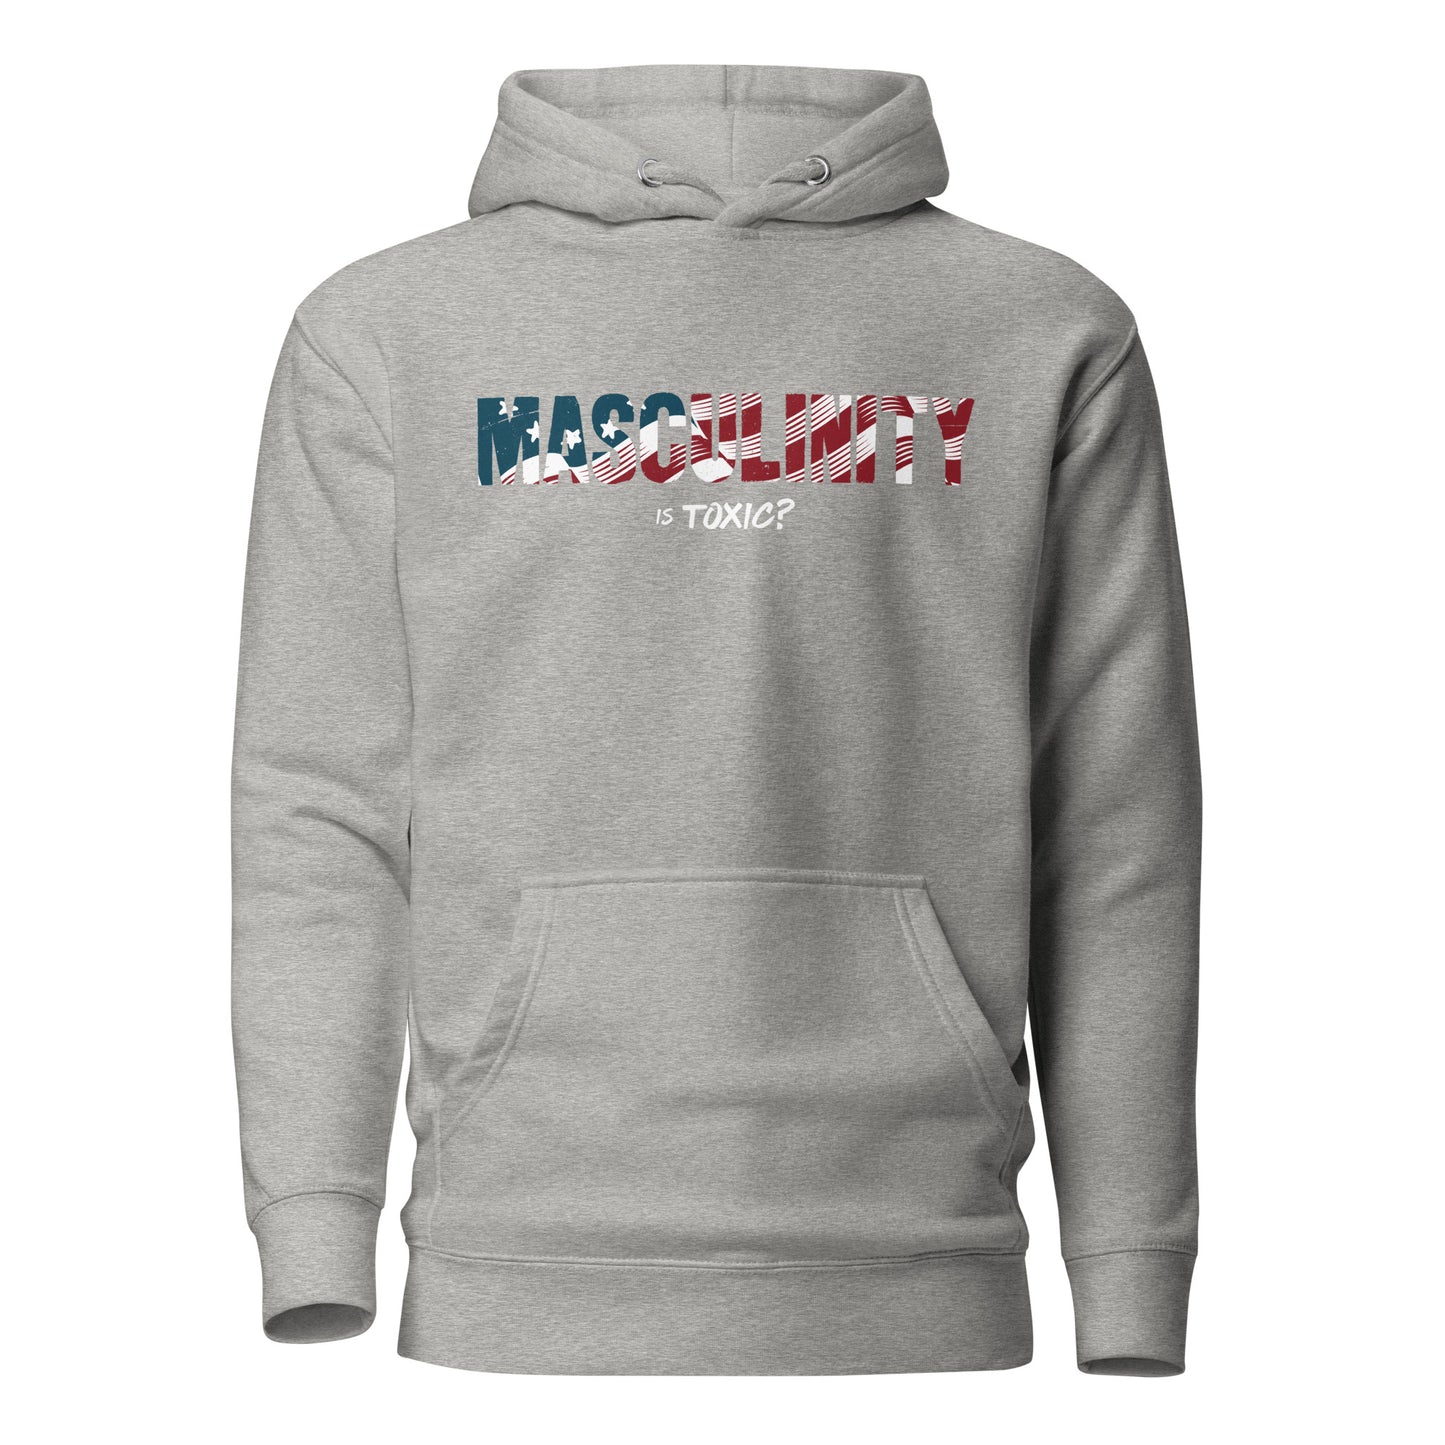 Masculinity is Toxic? Hoodie